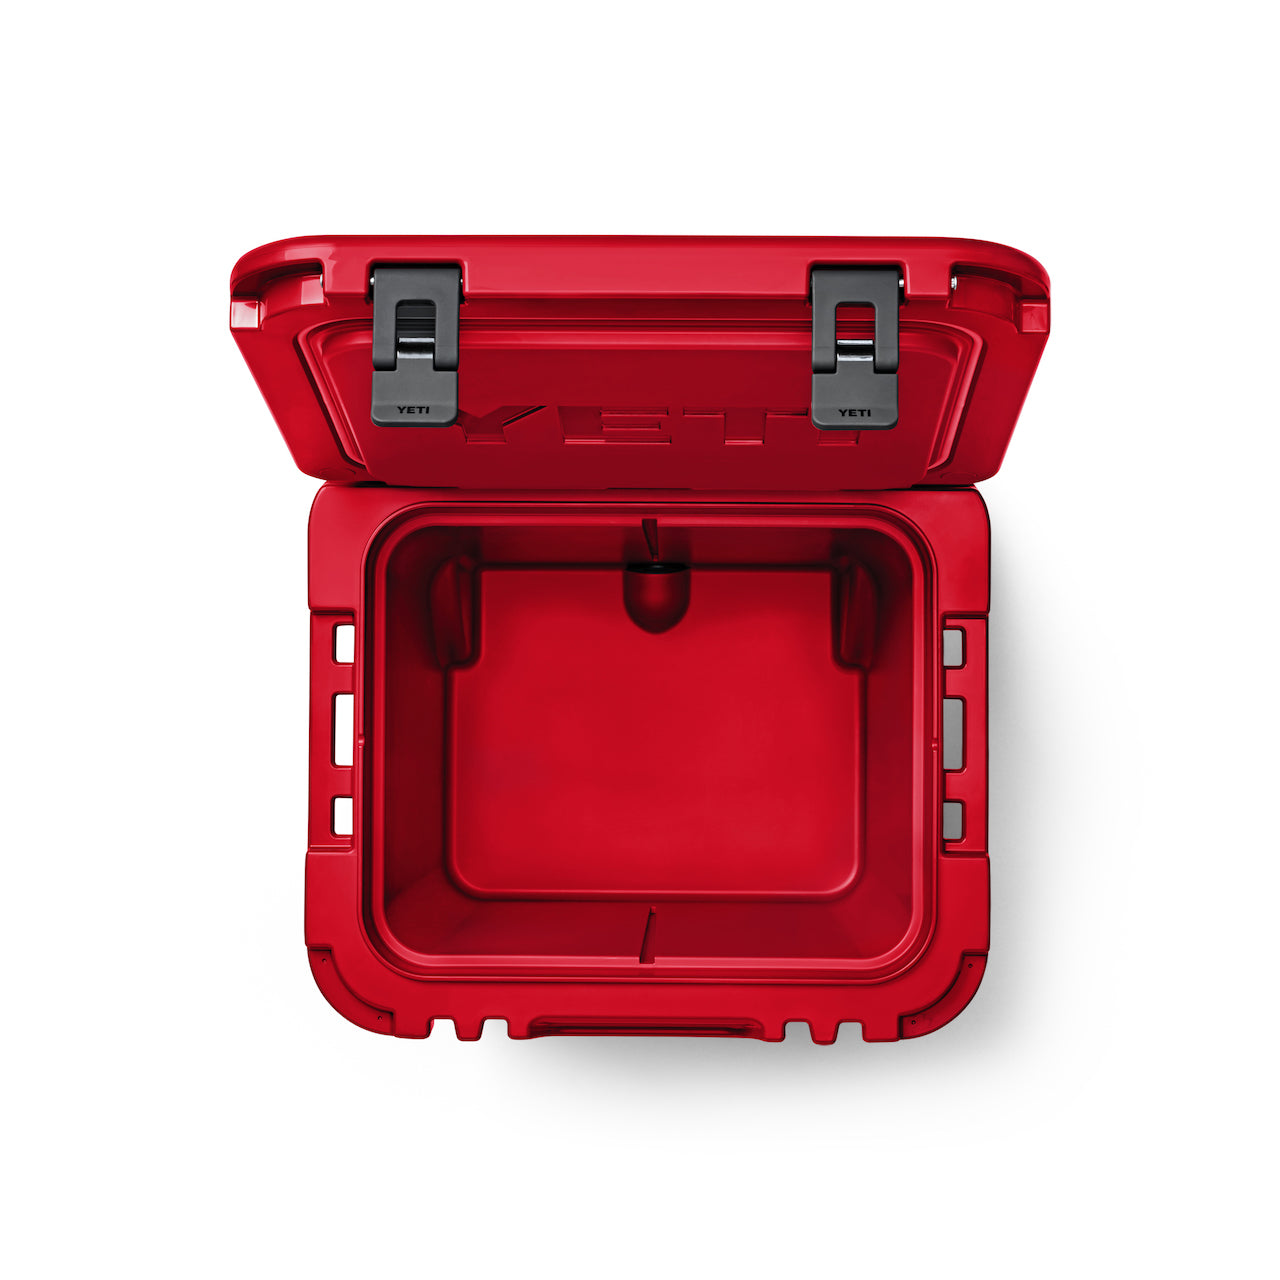 YETI Roadie 48 Wheeled Cool Box in rescue red top